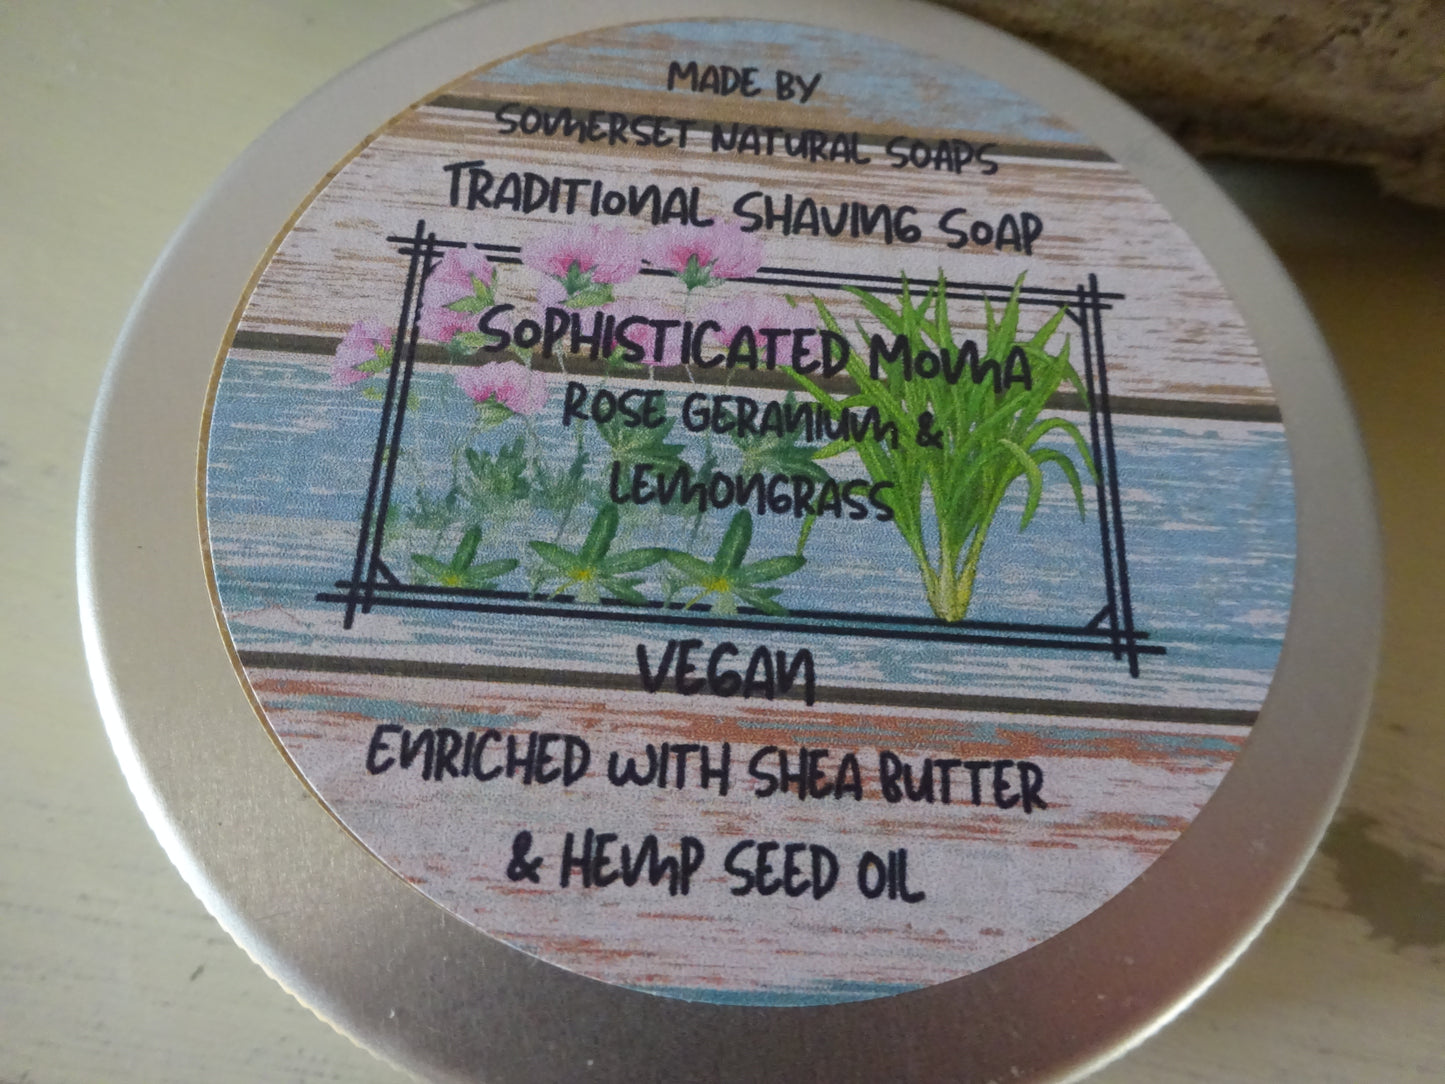 Traditional Shaving Soap "Sophisticated Moma"